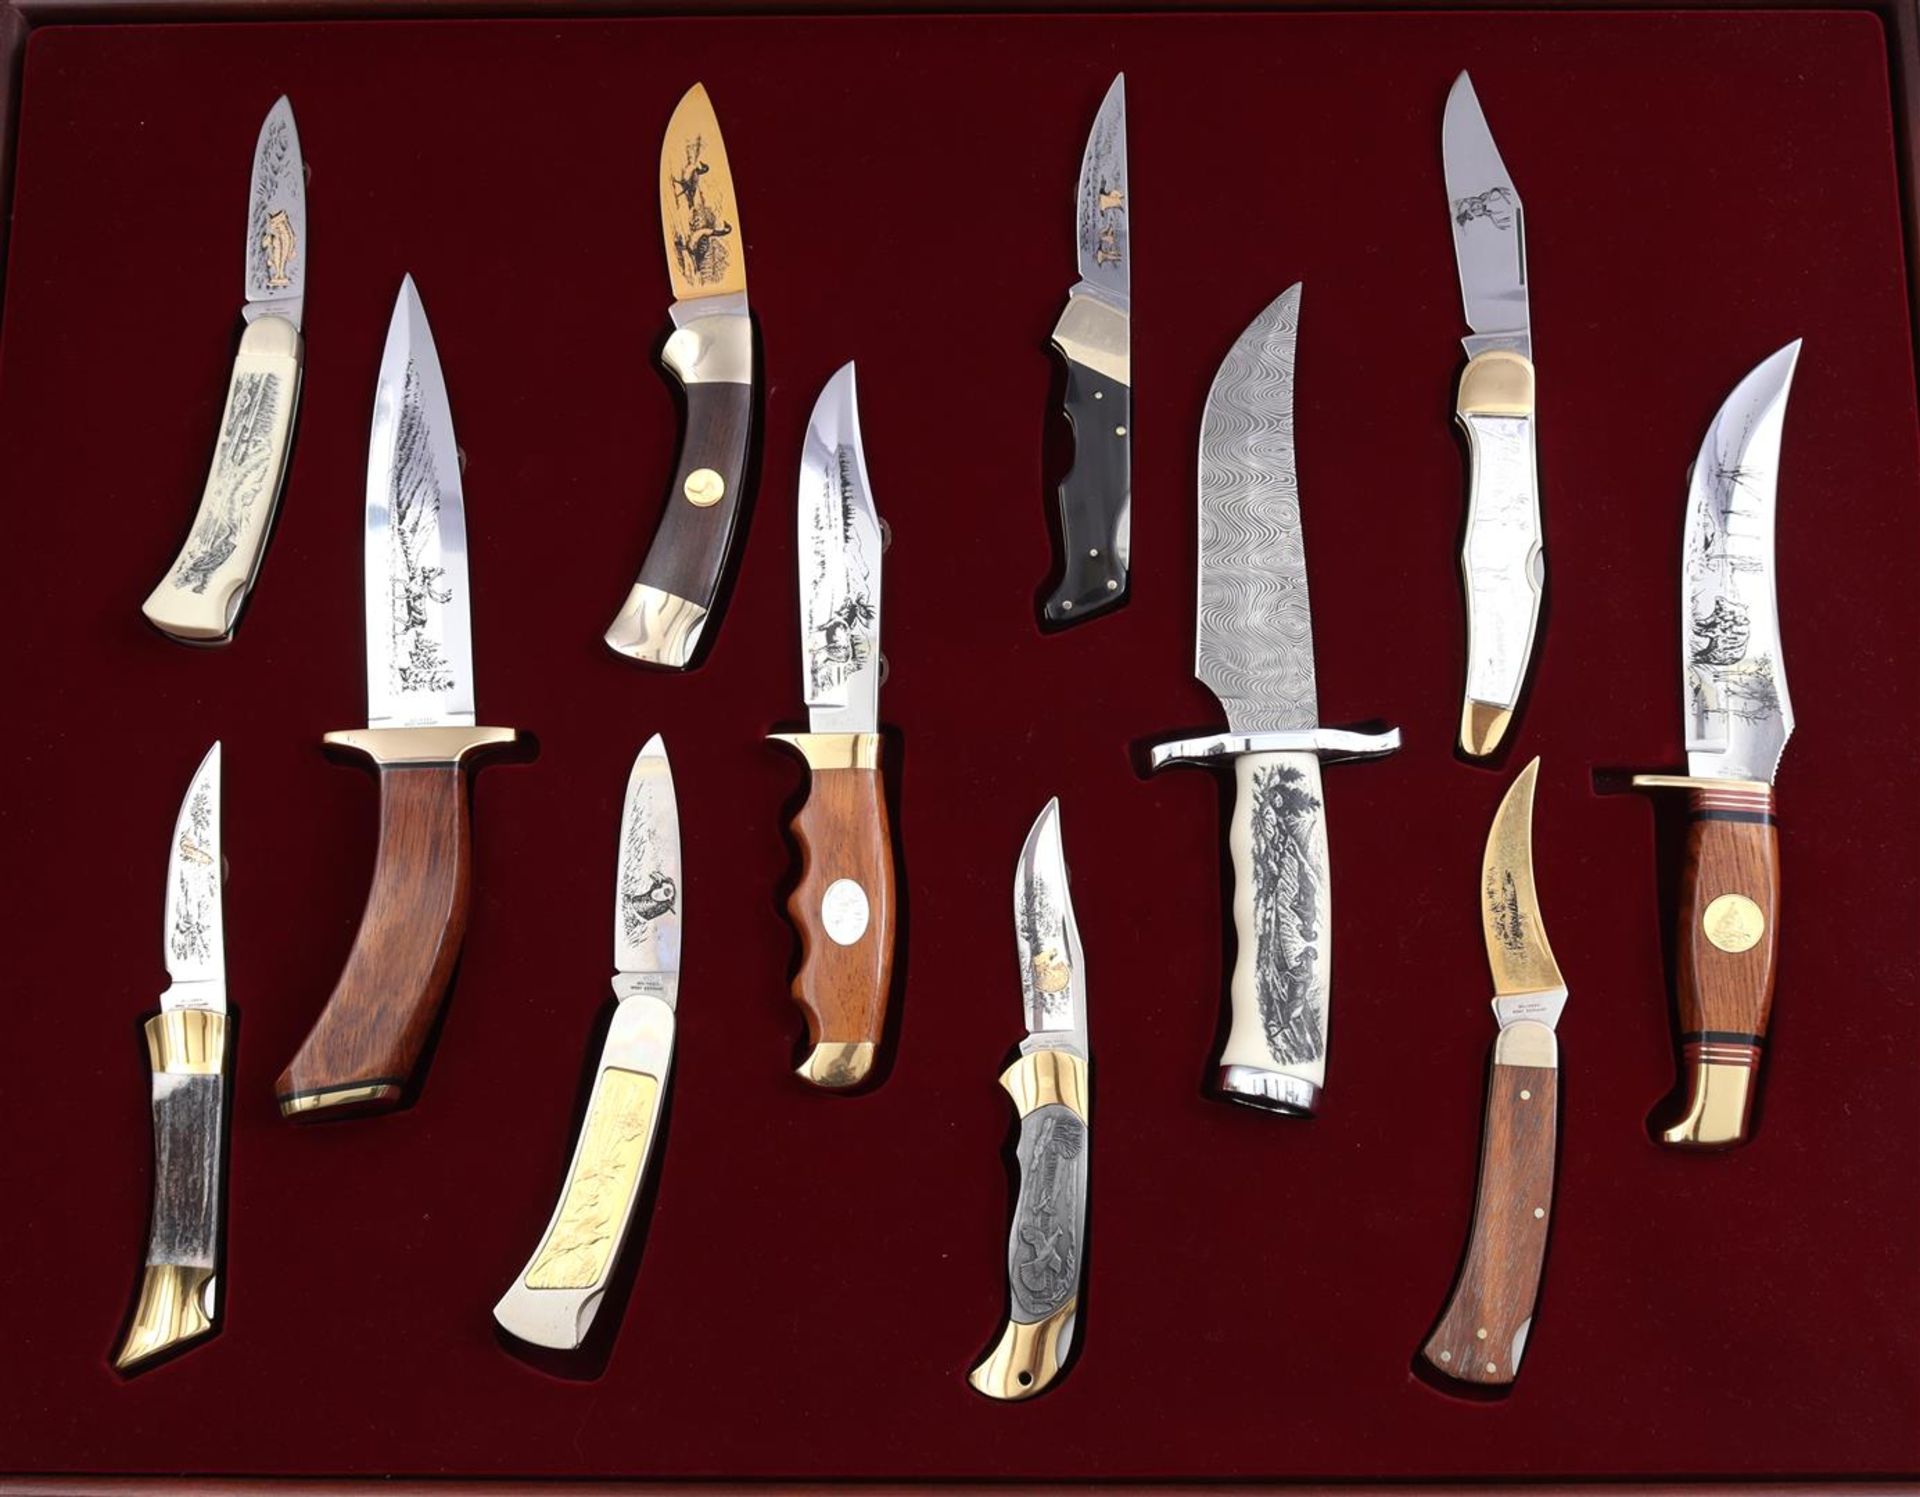 Franklin Mint knives in display case - Image 2 of 2